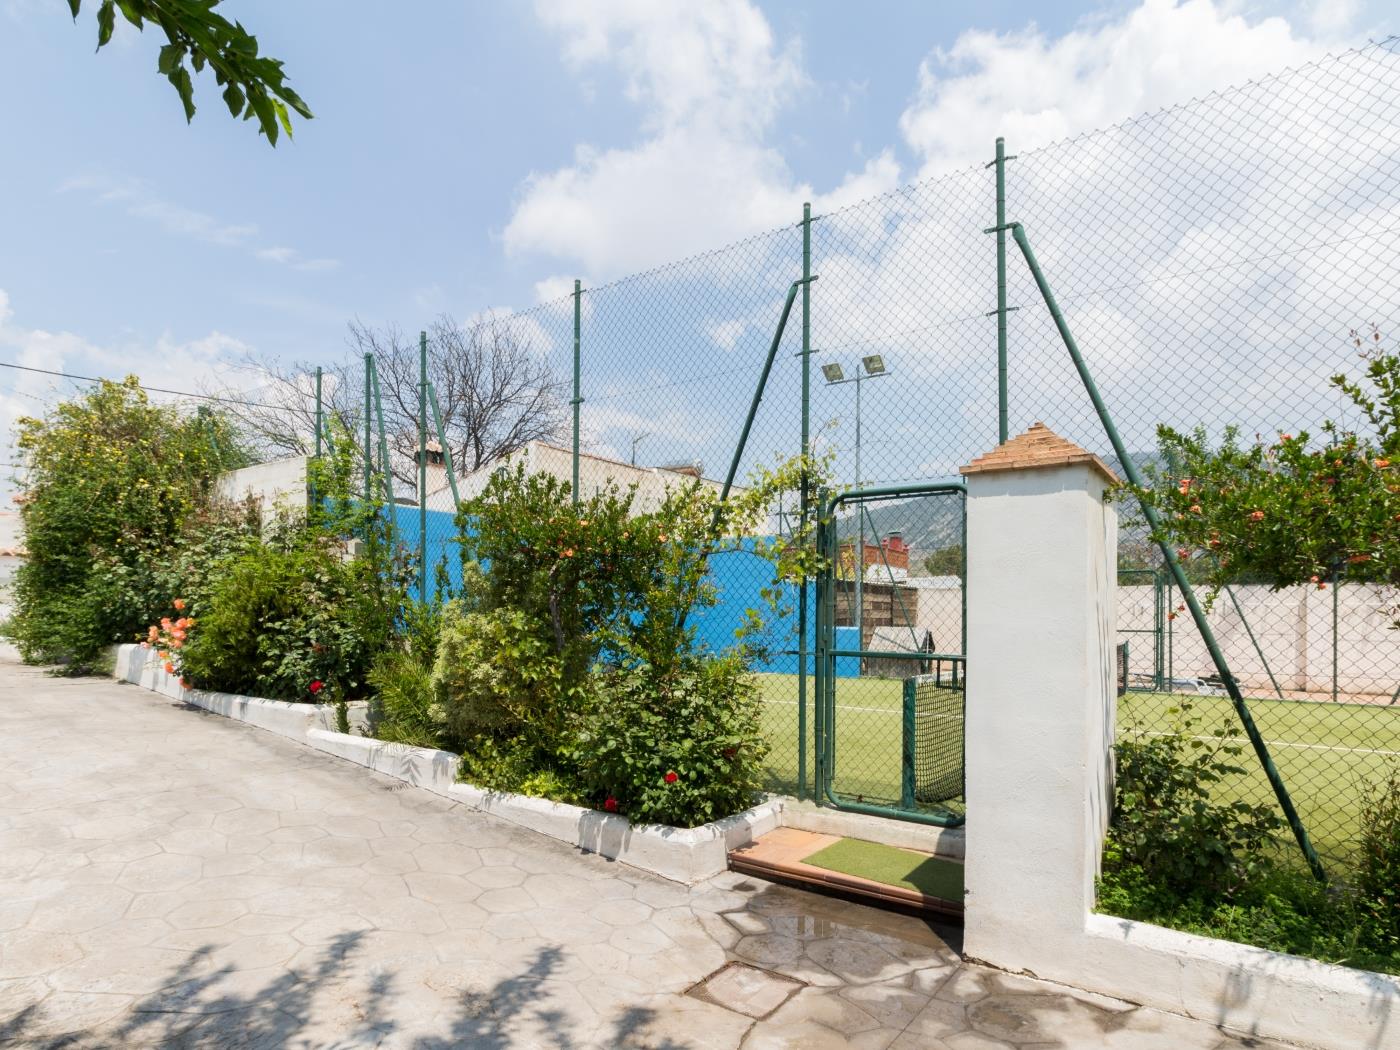 Accommodation with pool and paddle tennis court in Padul